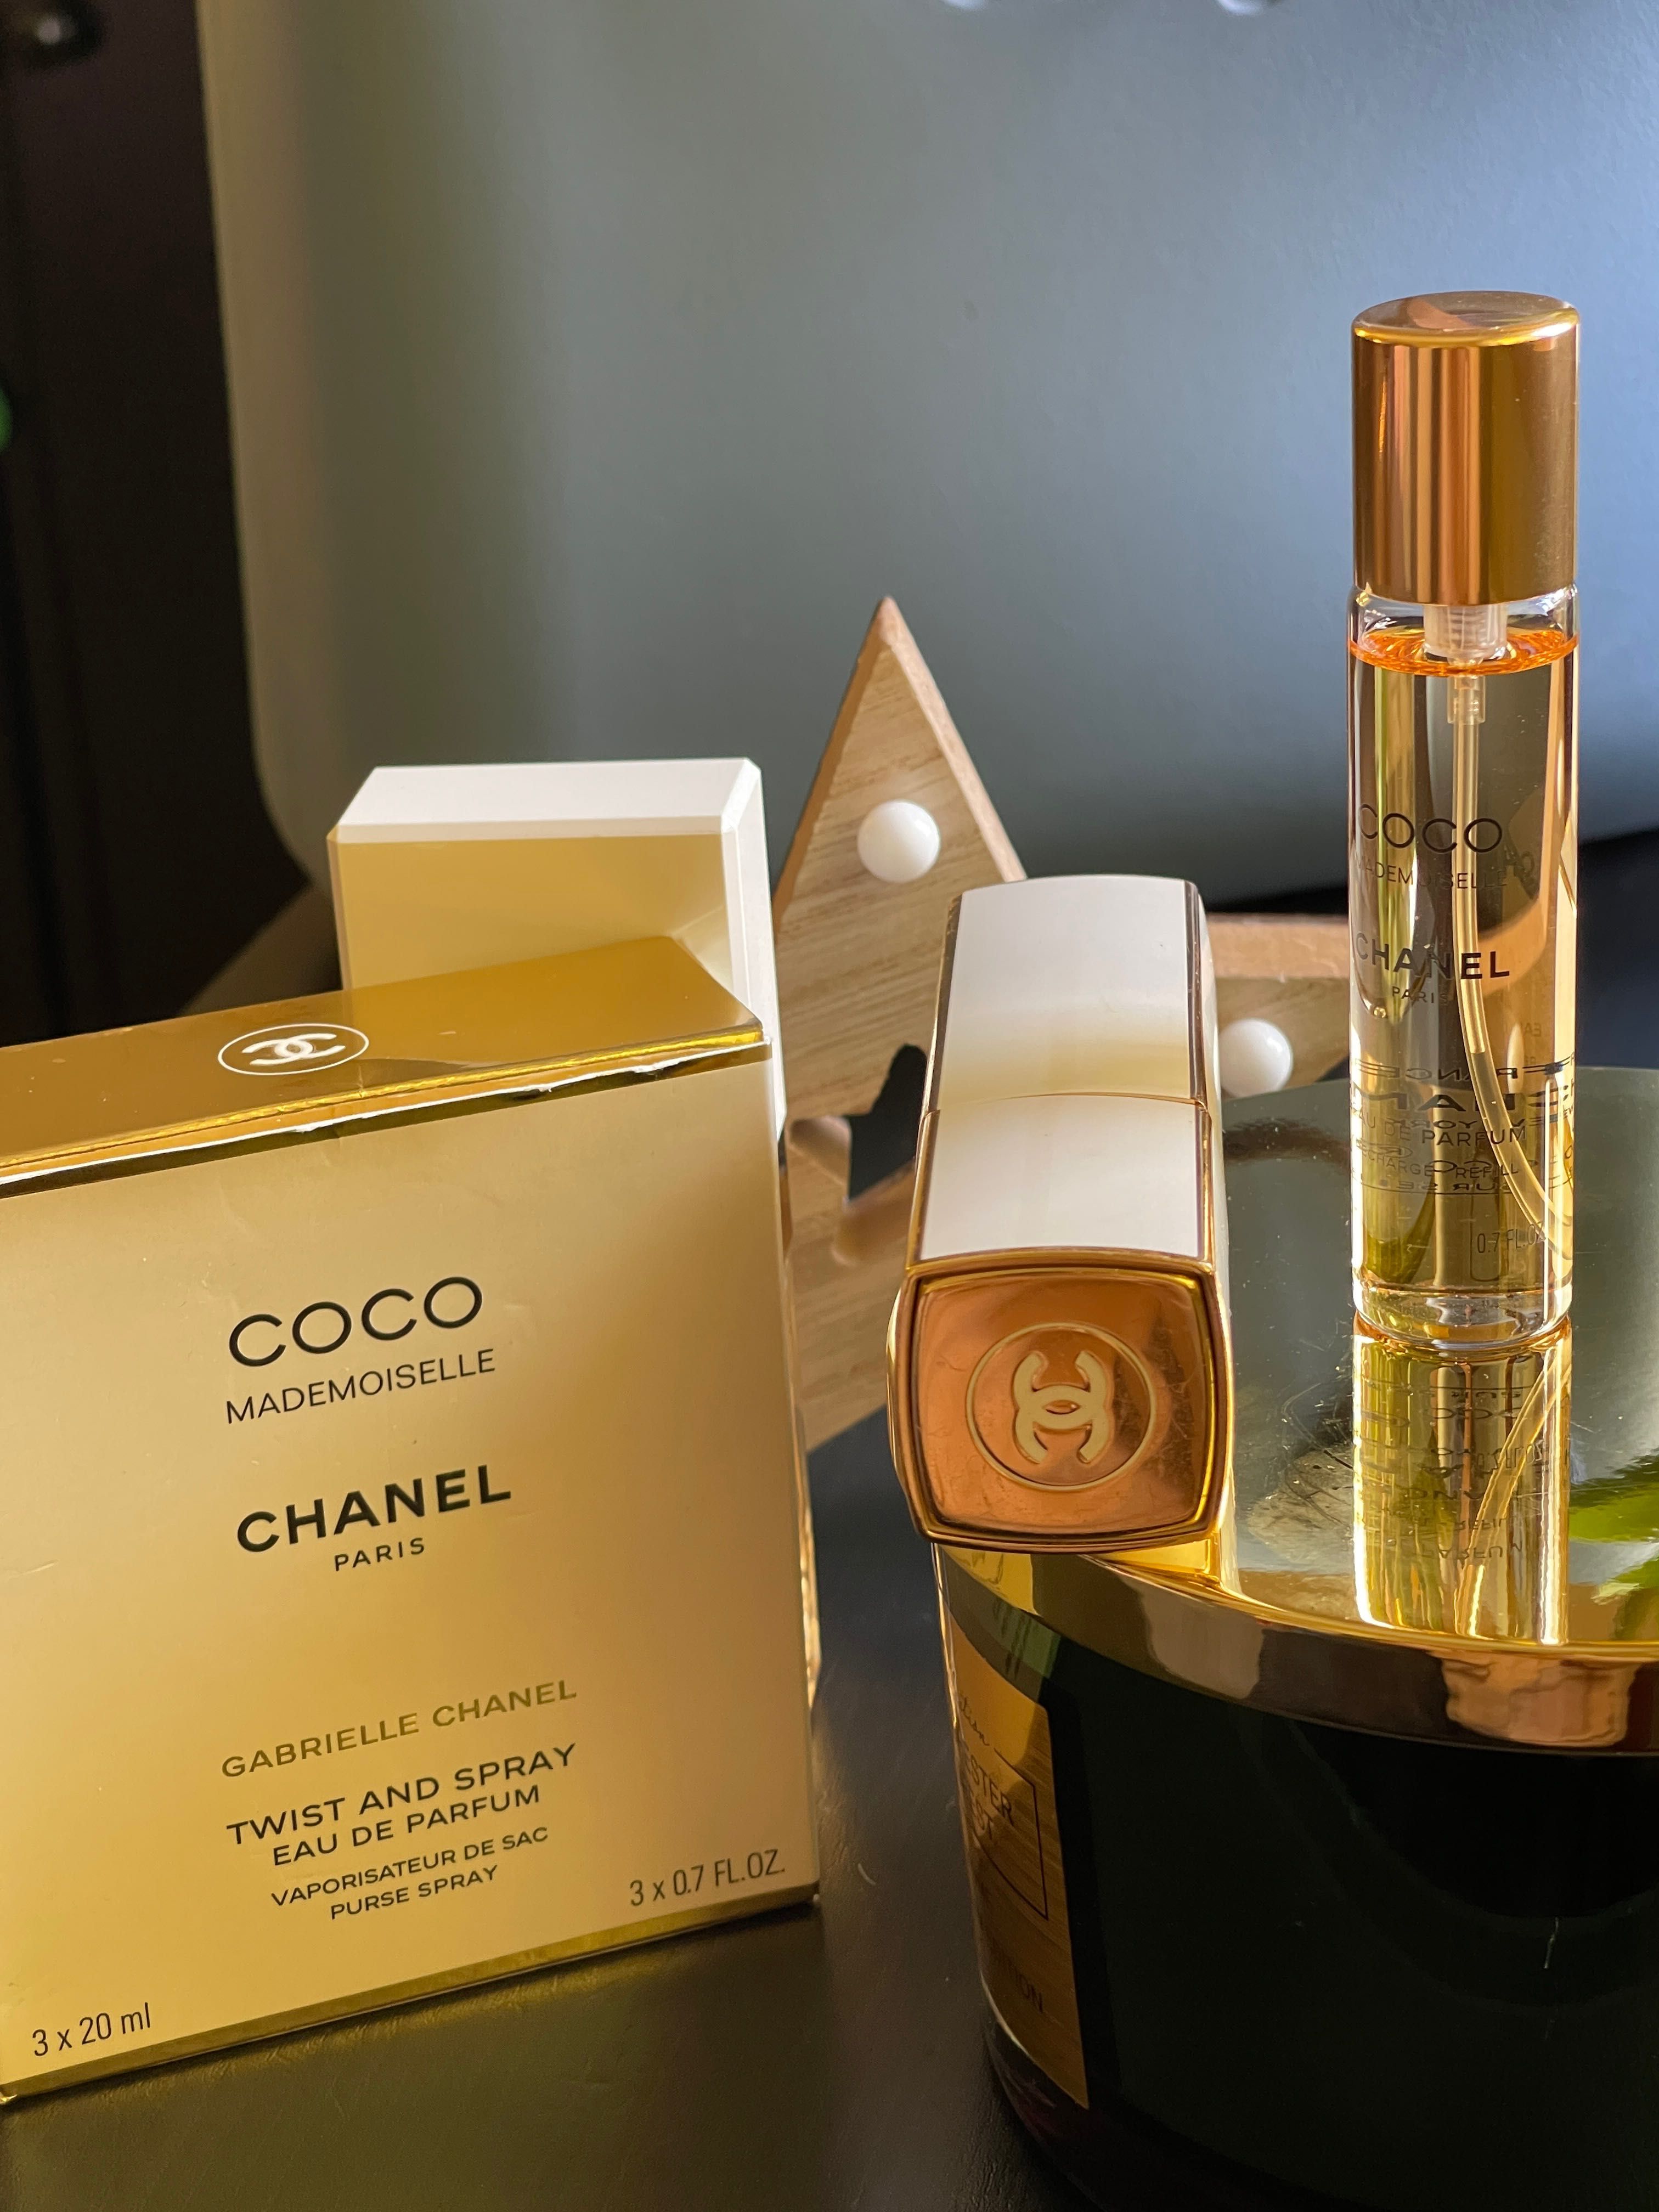 Chanel Coco Mademoiselle EDP twist and spray